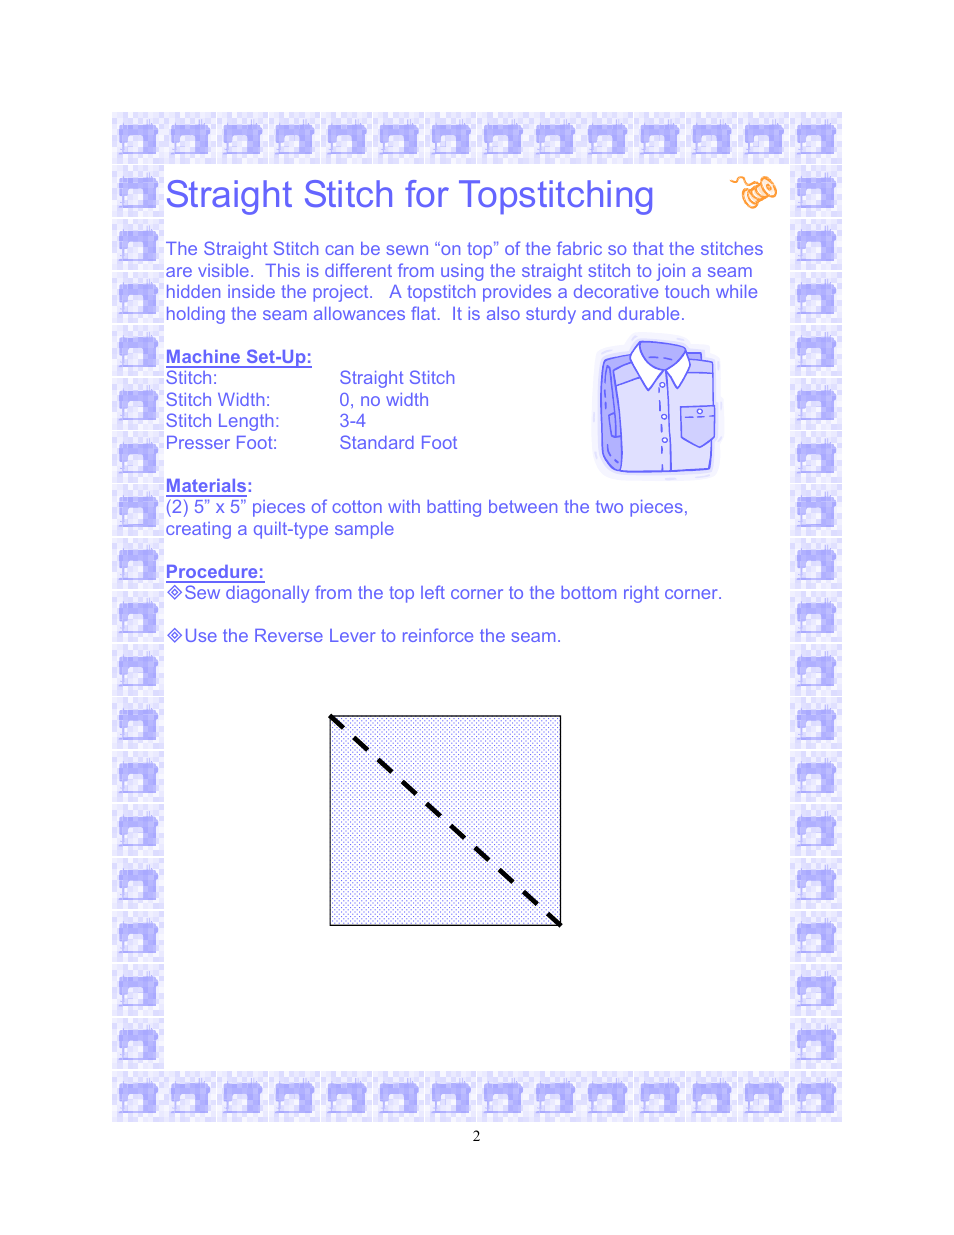 Straight stitch for topstitching | SINGER 6550-WORKBOOK Scholastic User Manual | Page 6 / 59